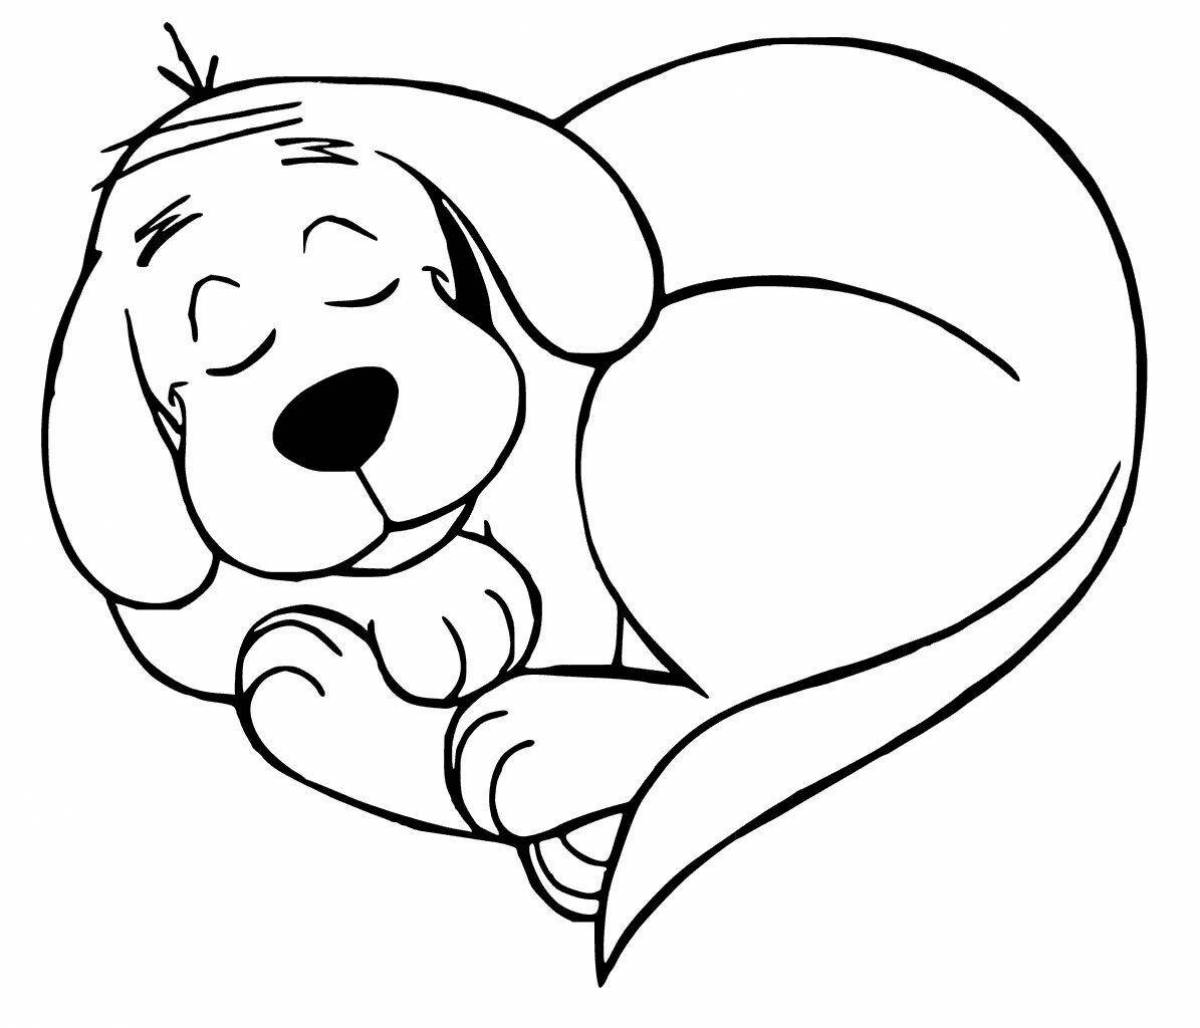 Fun dog coloring for kids